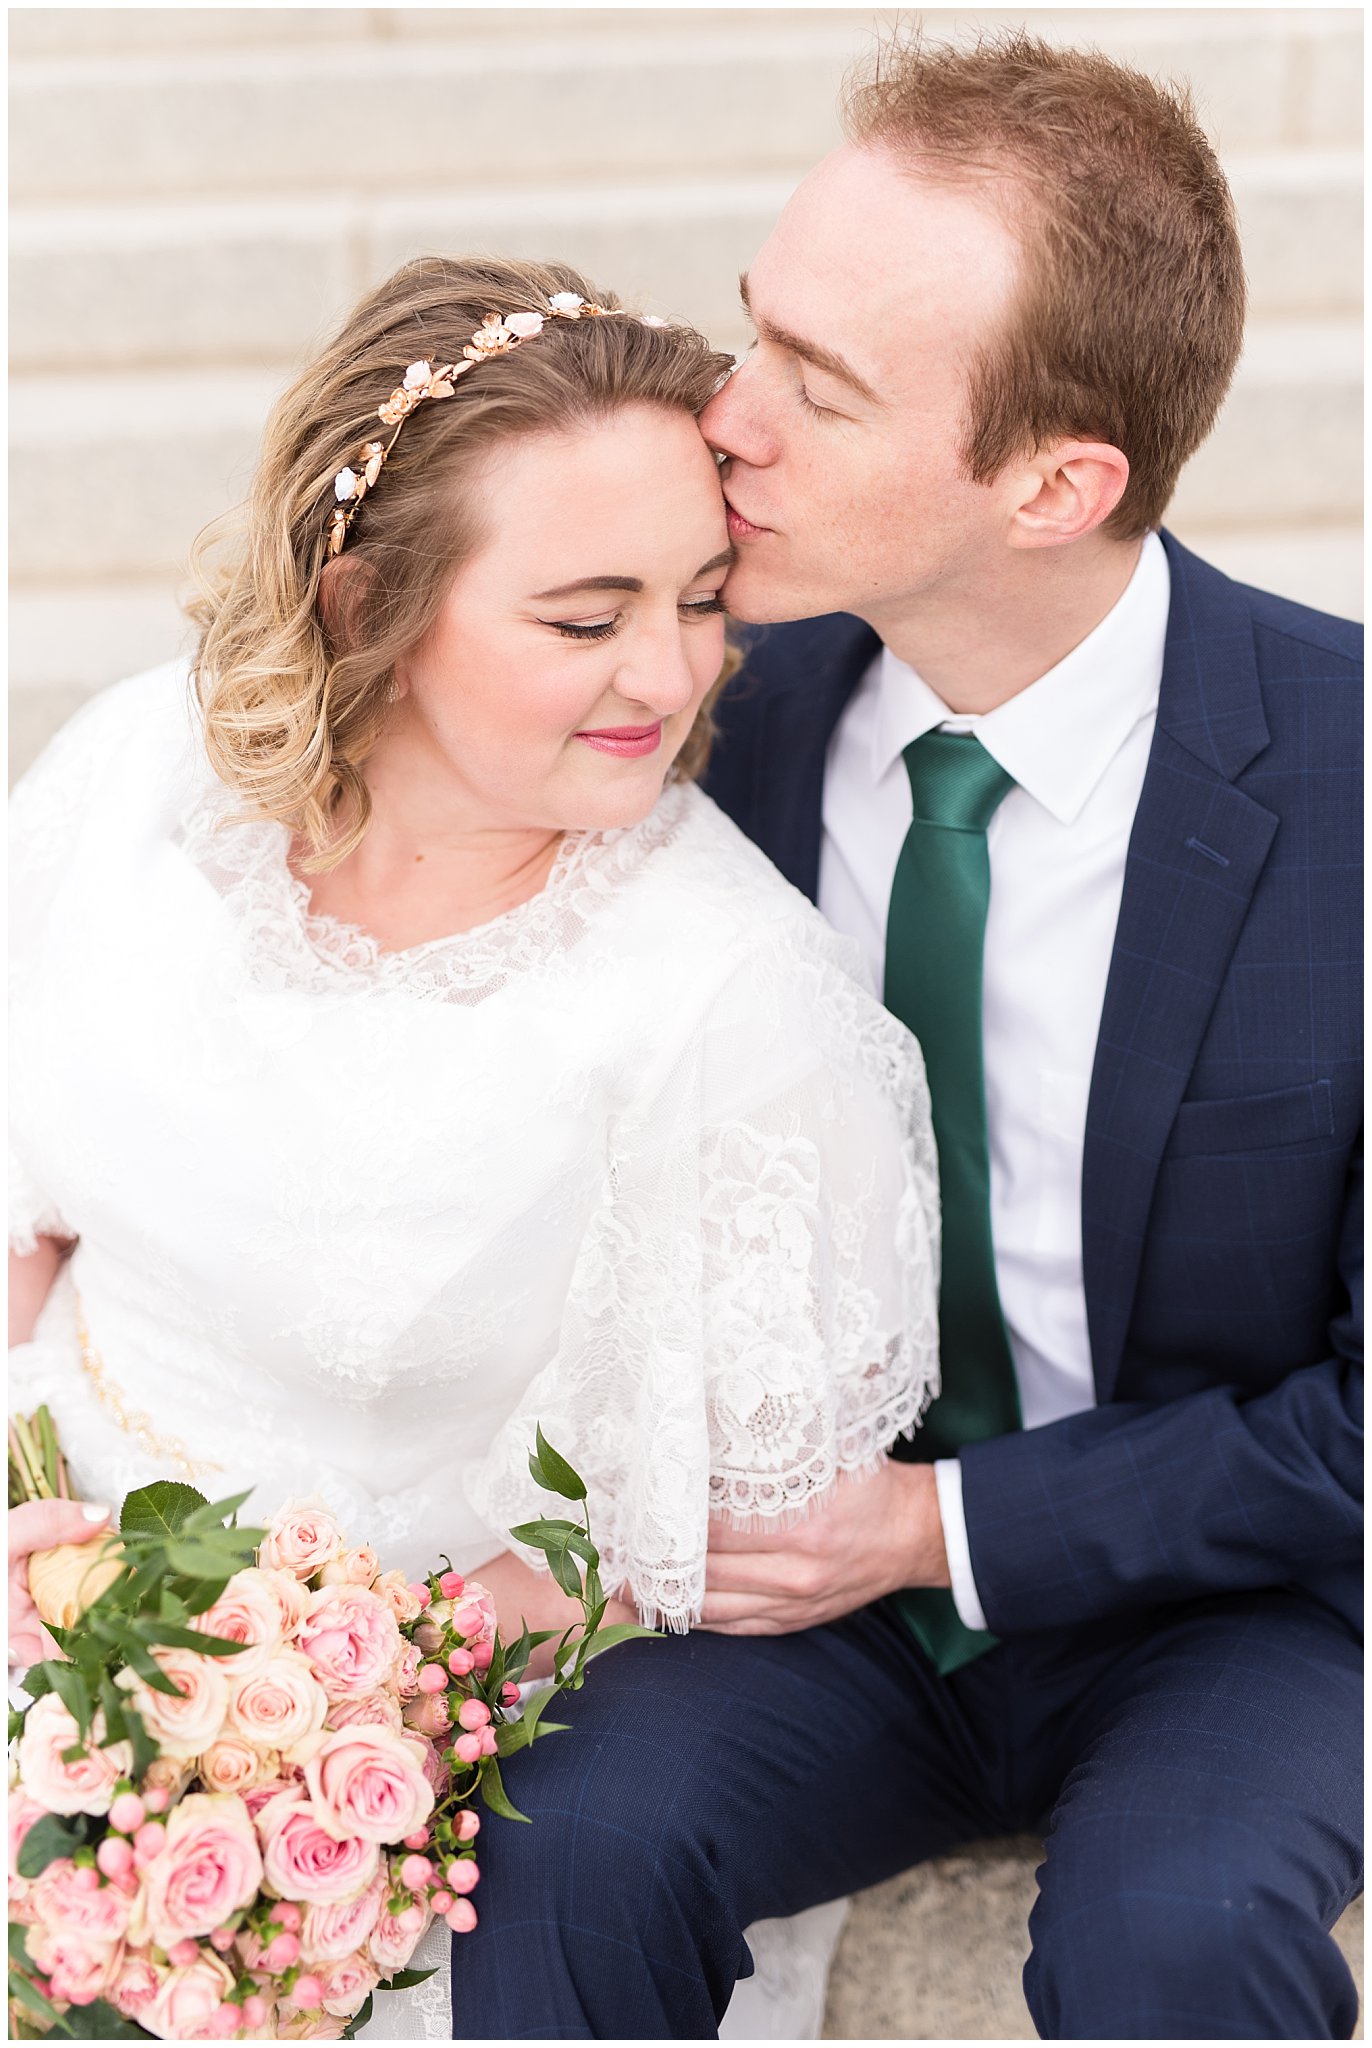 Groom kisses bride on forehead | Winter Formals at the Utah State Capitol | Utah Wedding Photography